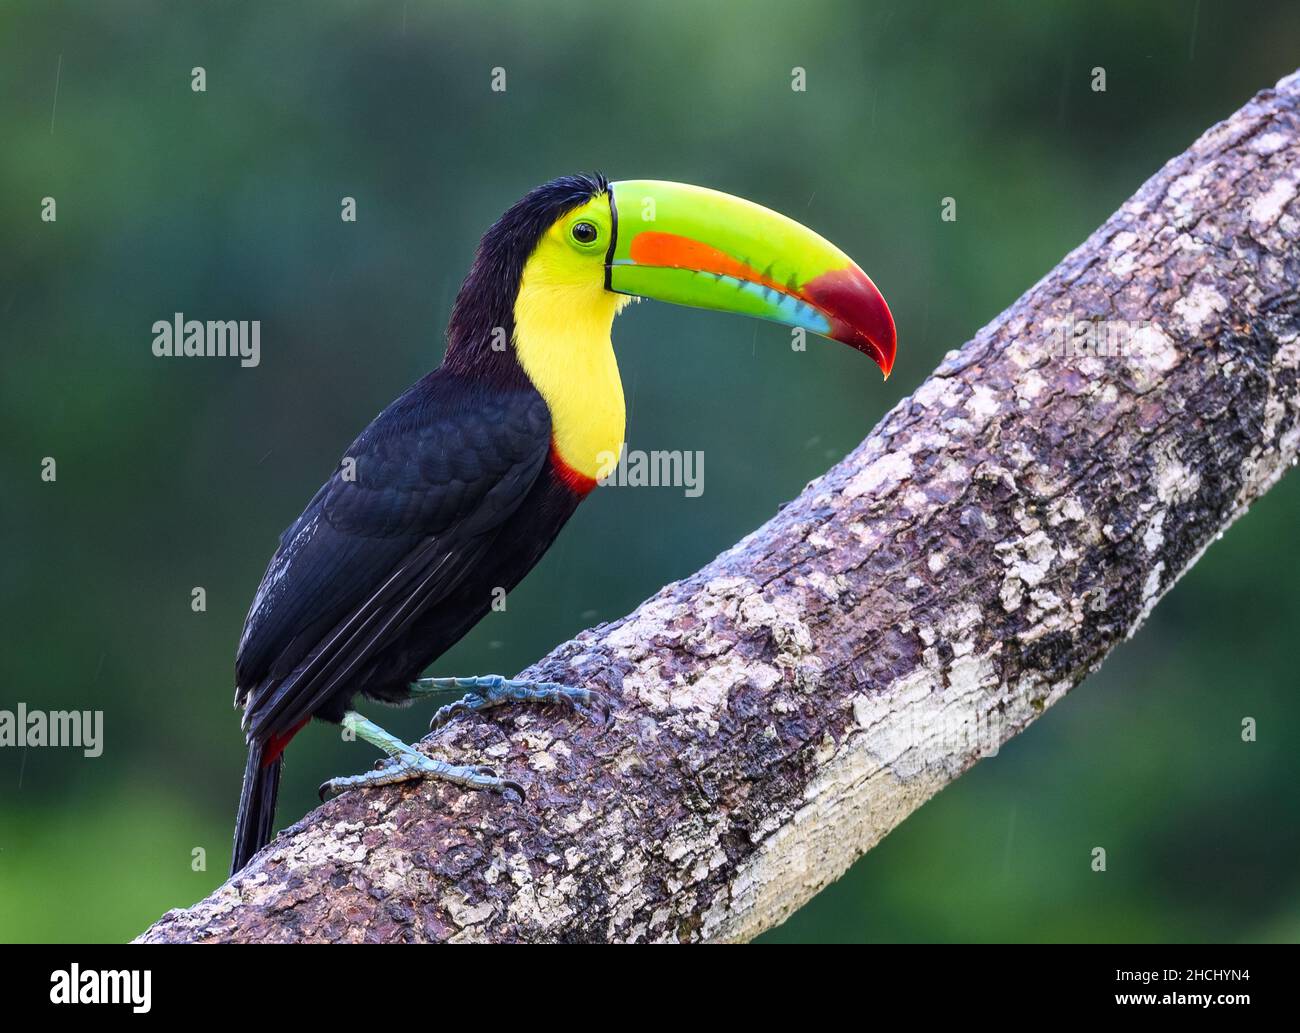 A Keel-billed Toucan (Ramphastos sulfuratus) perched on a tree. Costa Rica, Central America. Stock Photo